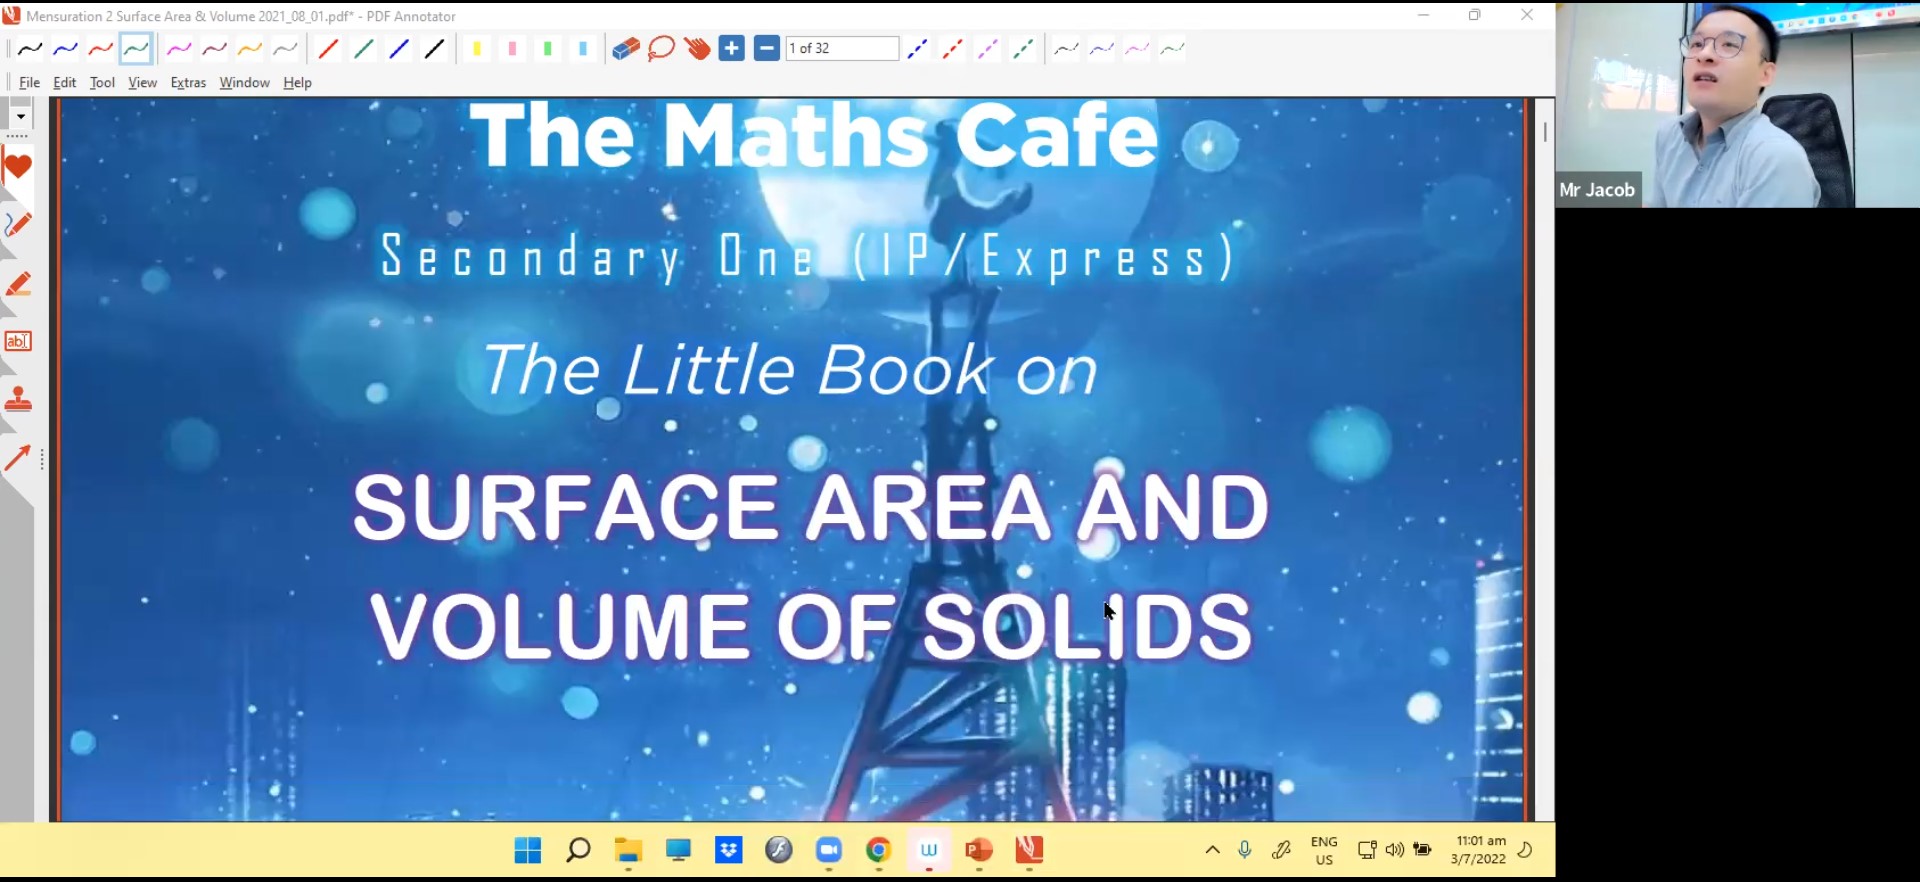 29. Mensuration 2: Surface Area & Volume of Solids L1 [2022] - JCT